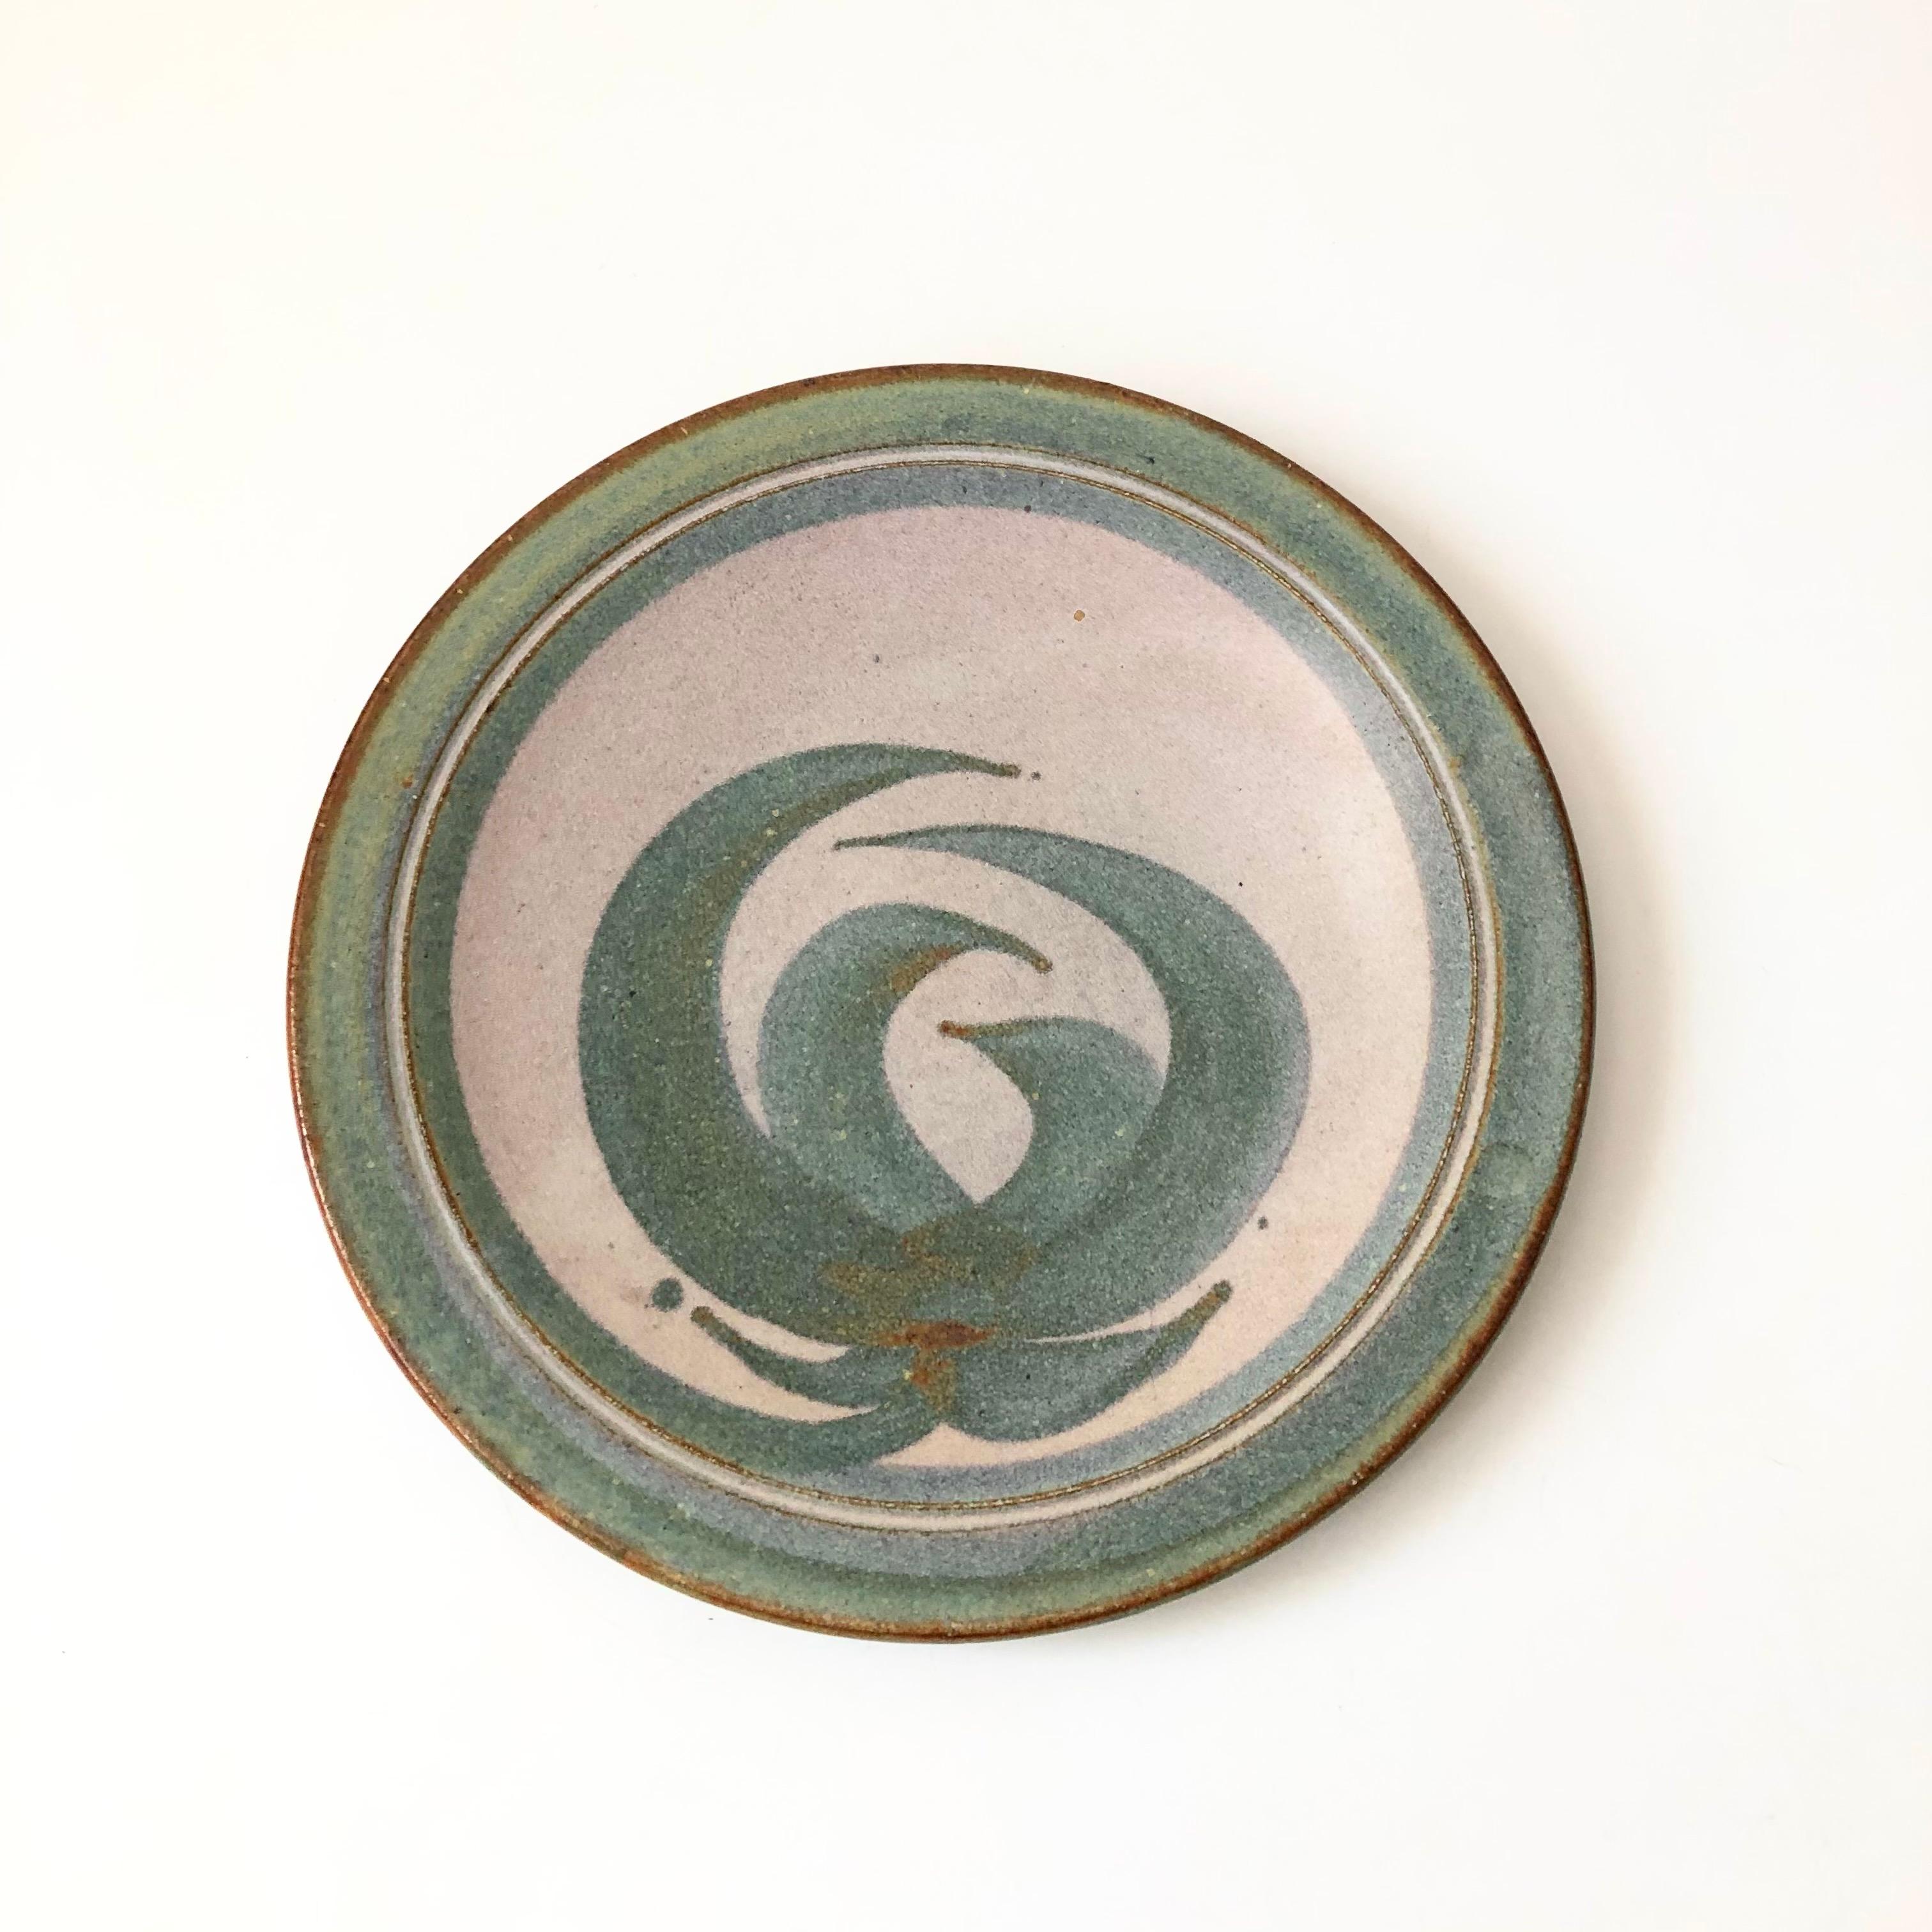 A large vintage studio pottery plate with a beautiful hand painted floral design in the center. Perfect for using as a large serving or decorative tray. Finished in pale purple and blue-green glazes. Signed by the artist on the base and dated 1982.

